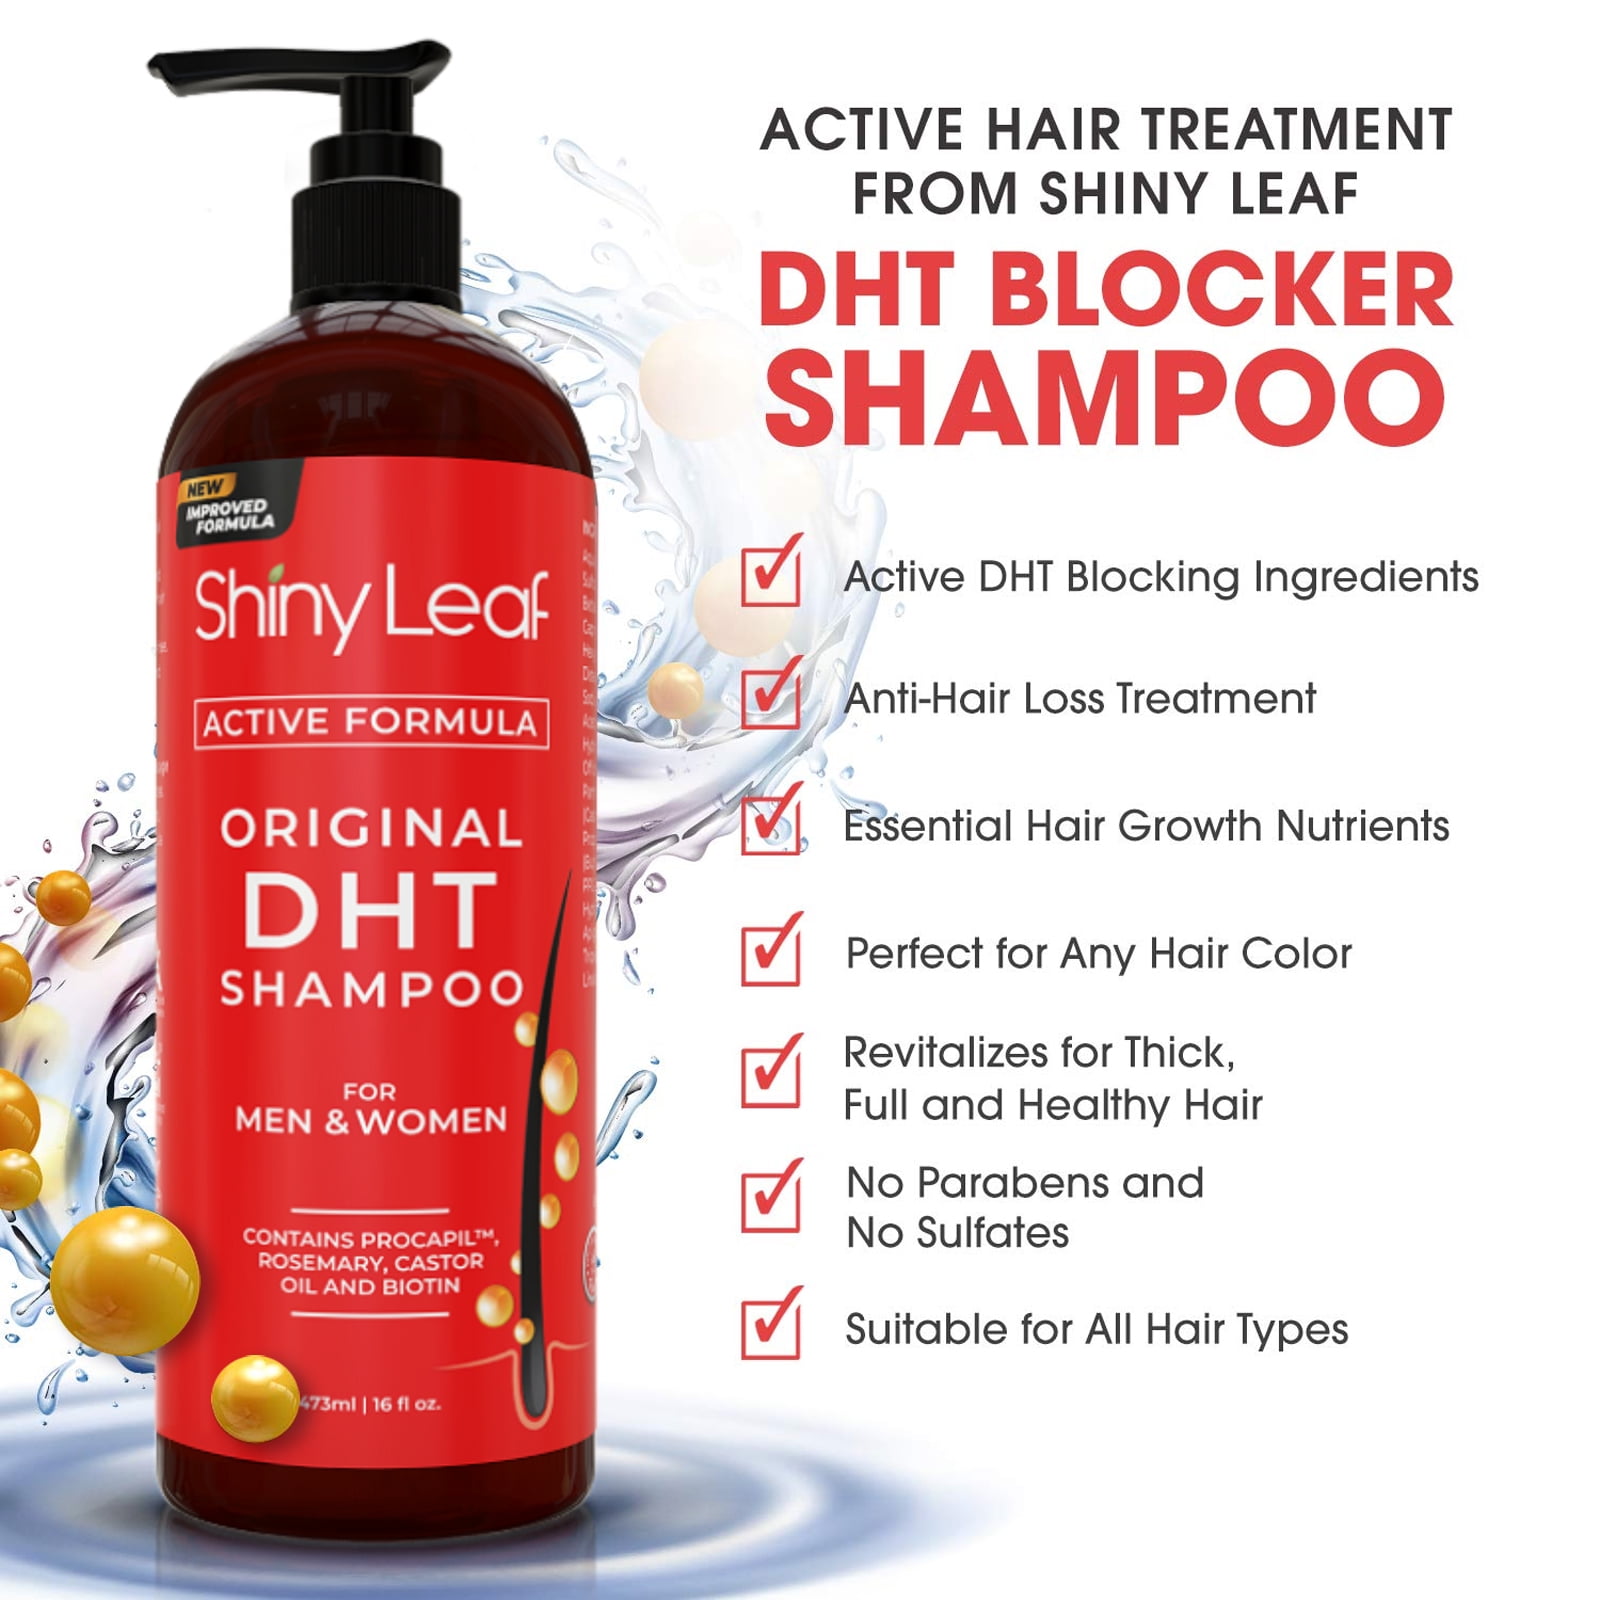 Shiny Leaf DHT Blocking Shampoo and Conditioner for Hair Loss with Biotin All Hair Types - Thinning Shampoo and Conditioner for Men and Women - Walmart.com